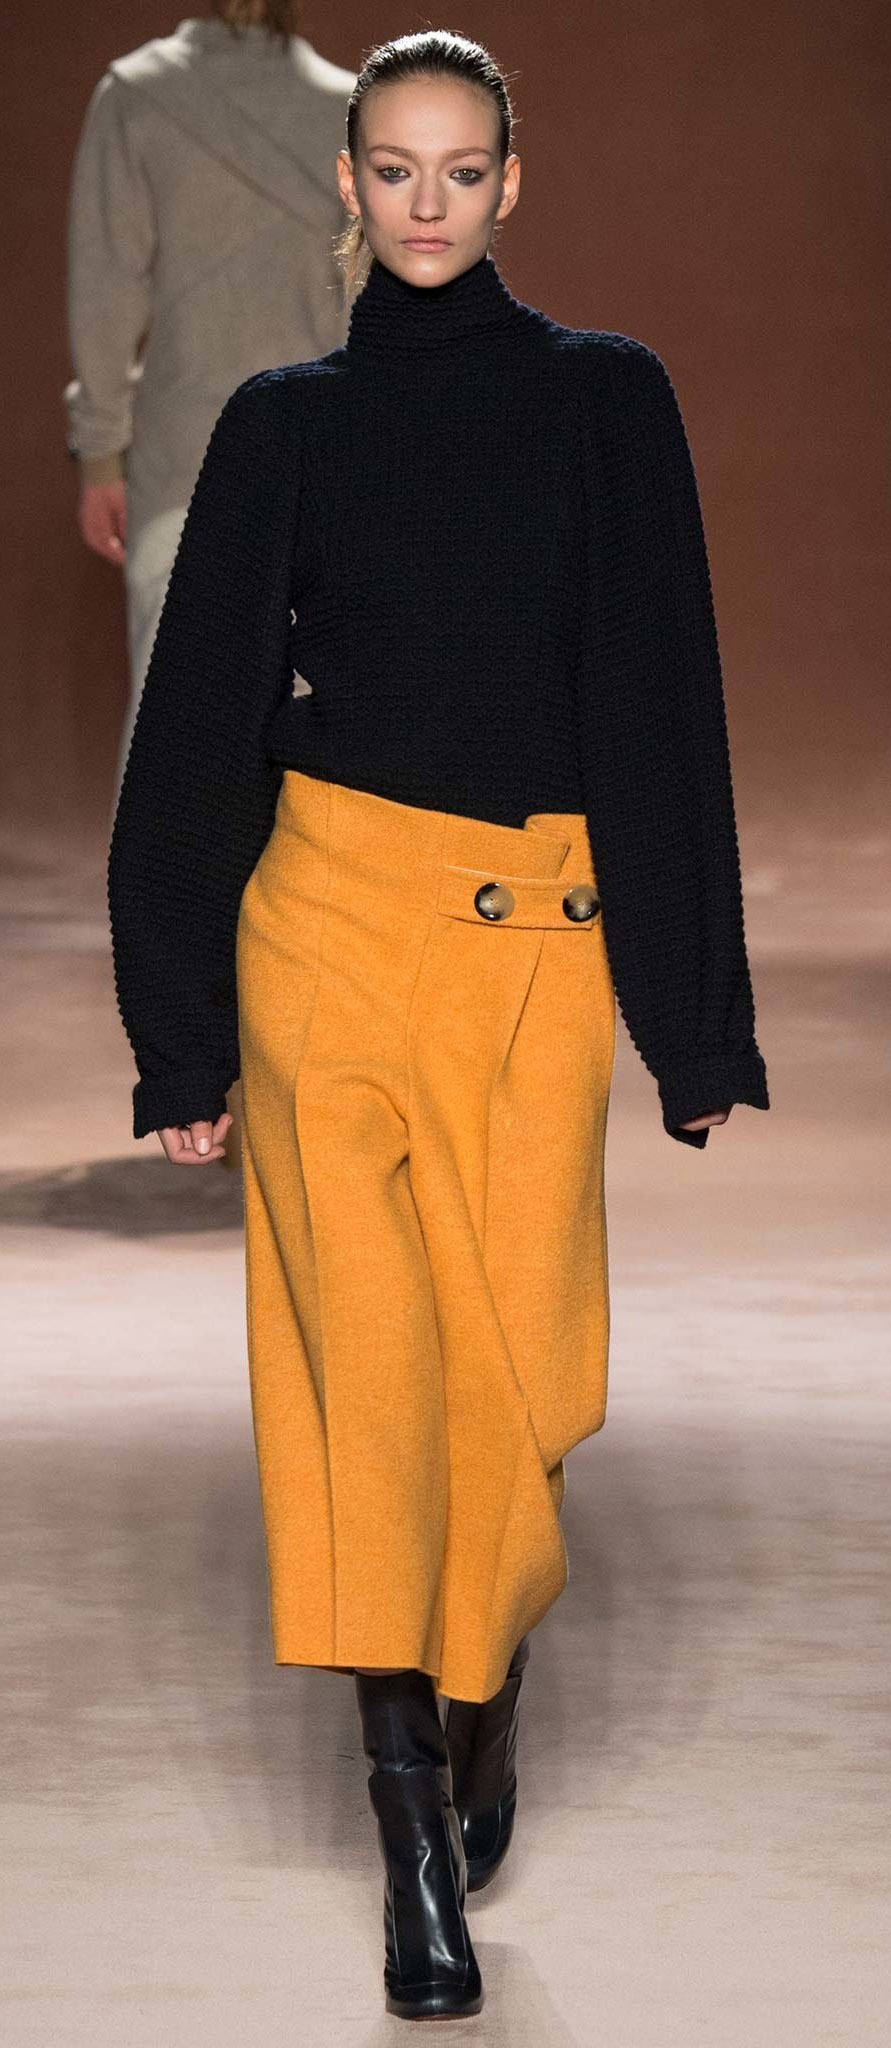 detail-dramatic-style-type-yellow-culottes-pant-black-sweater-oversized-turtleneck-runway-boots.jpg